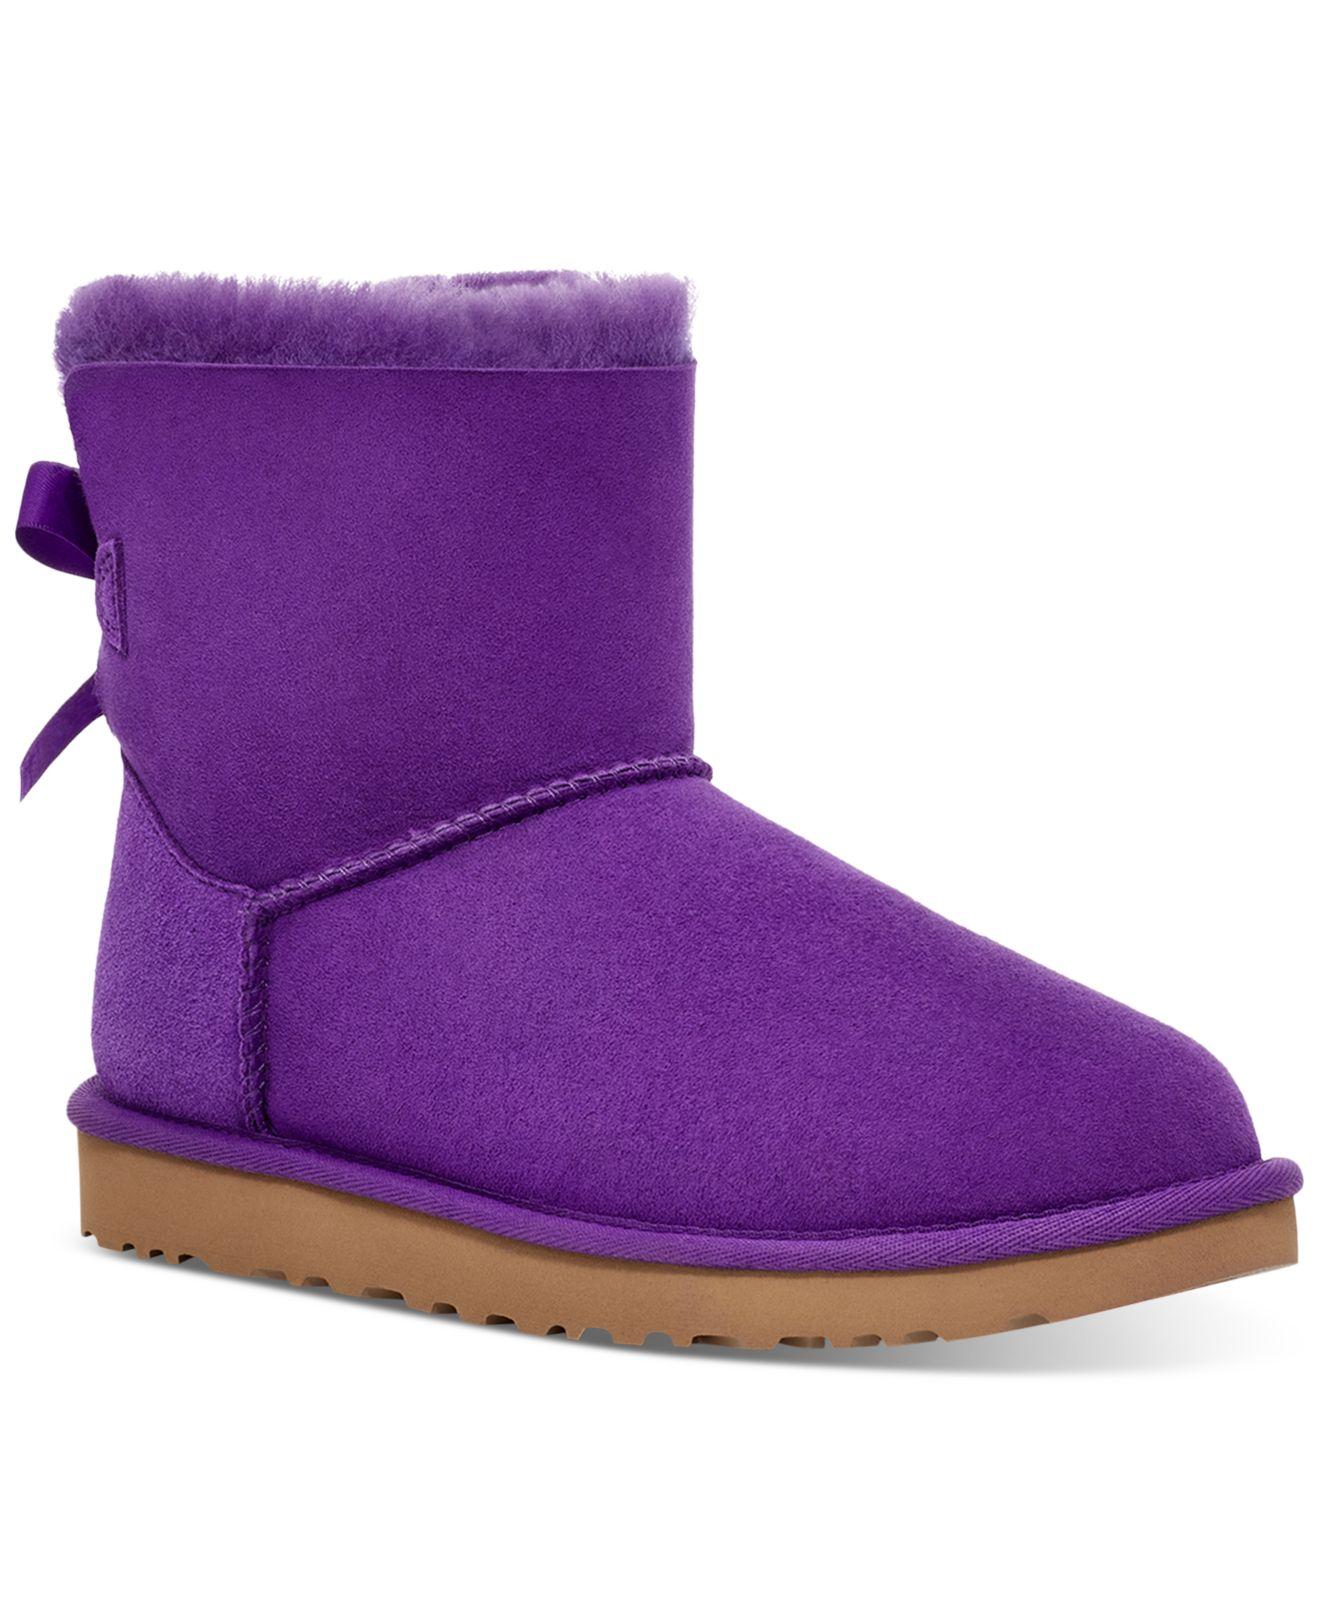 UGG Suede Mini Bailey Bow Ii Boots in Purple | Lyst